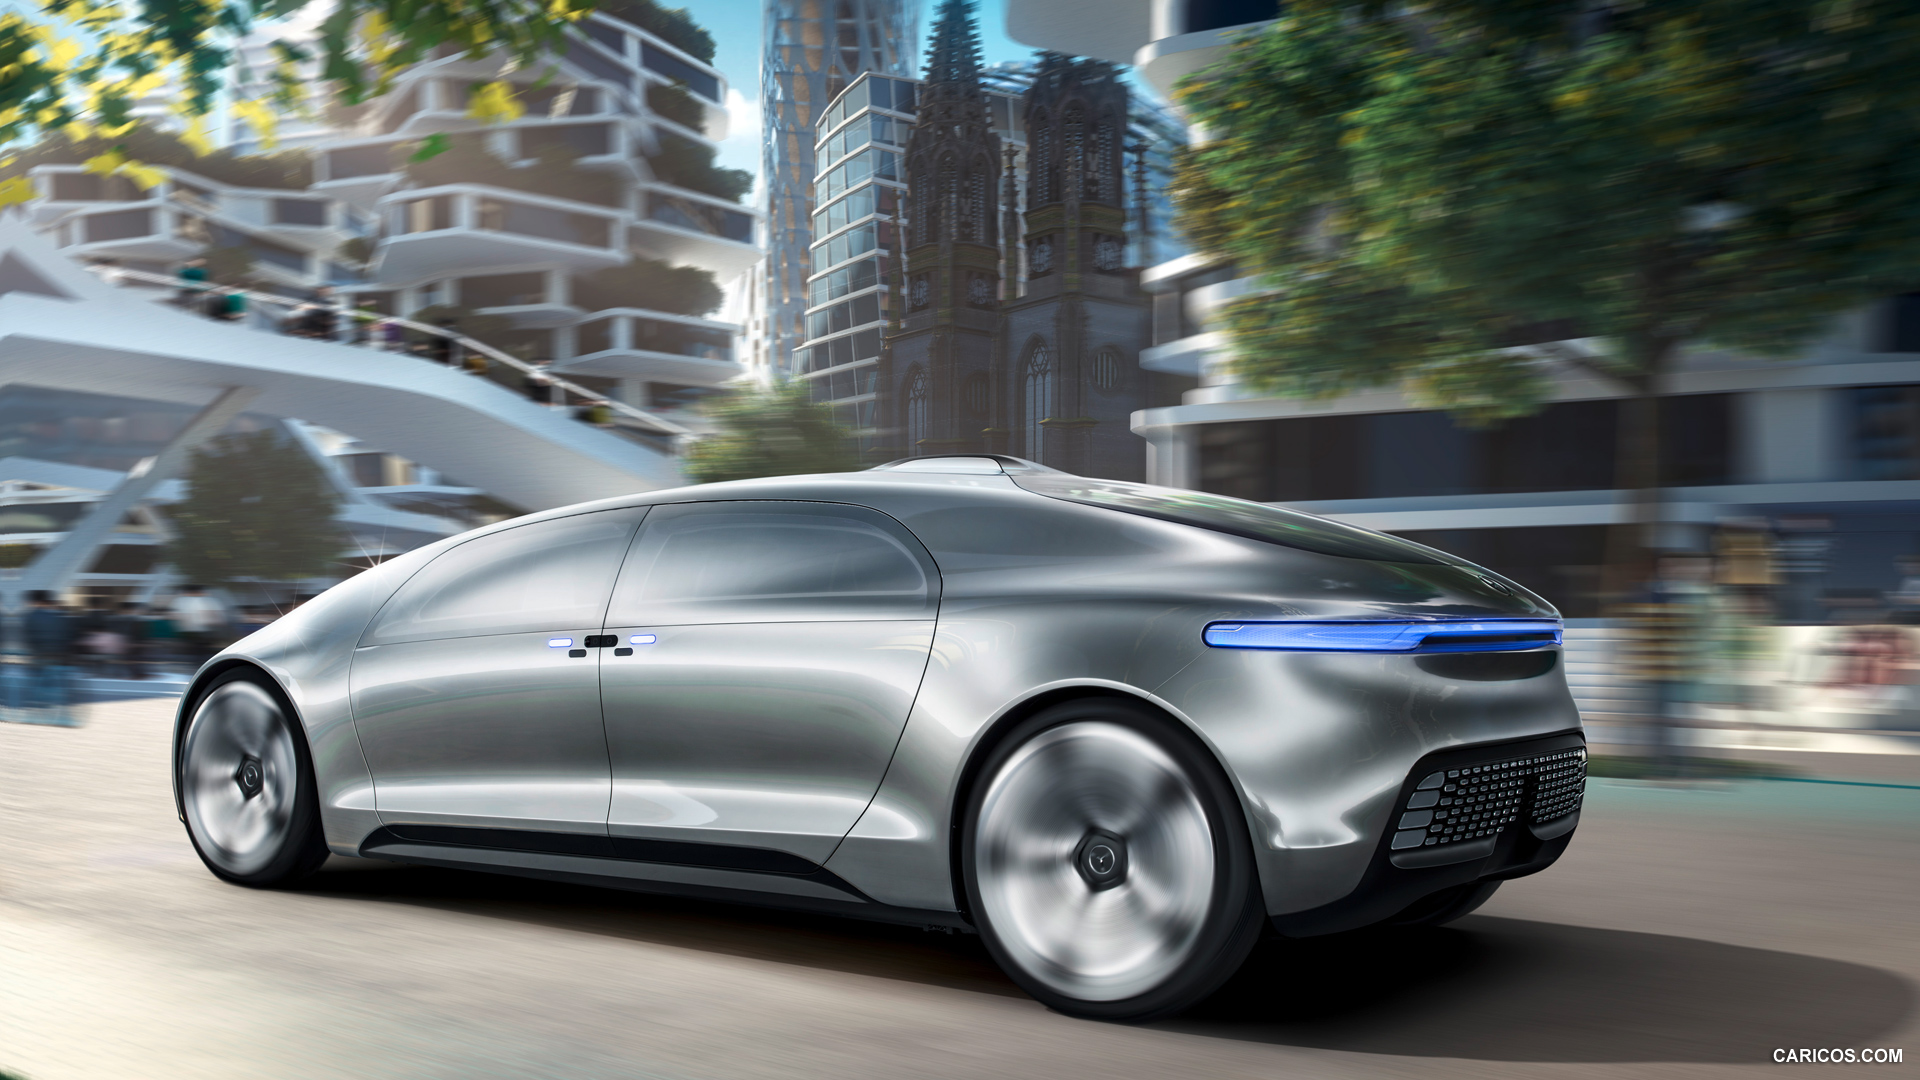 2015 Mercedes-Benz F 015 Luxury in Motion Concept  - Side, #5 of 92